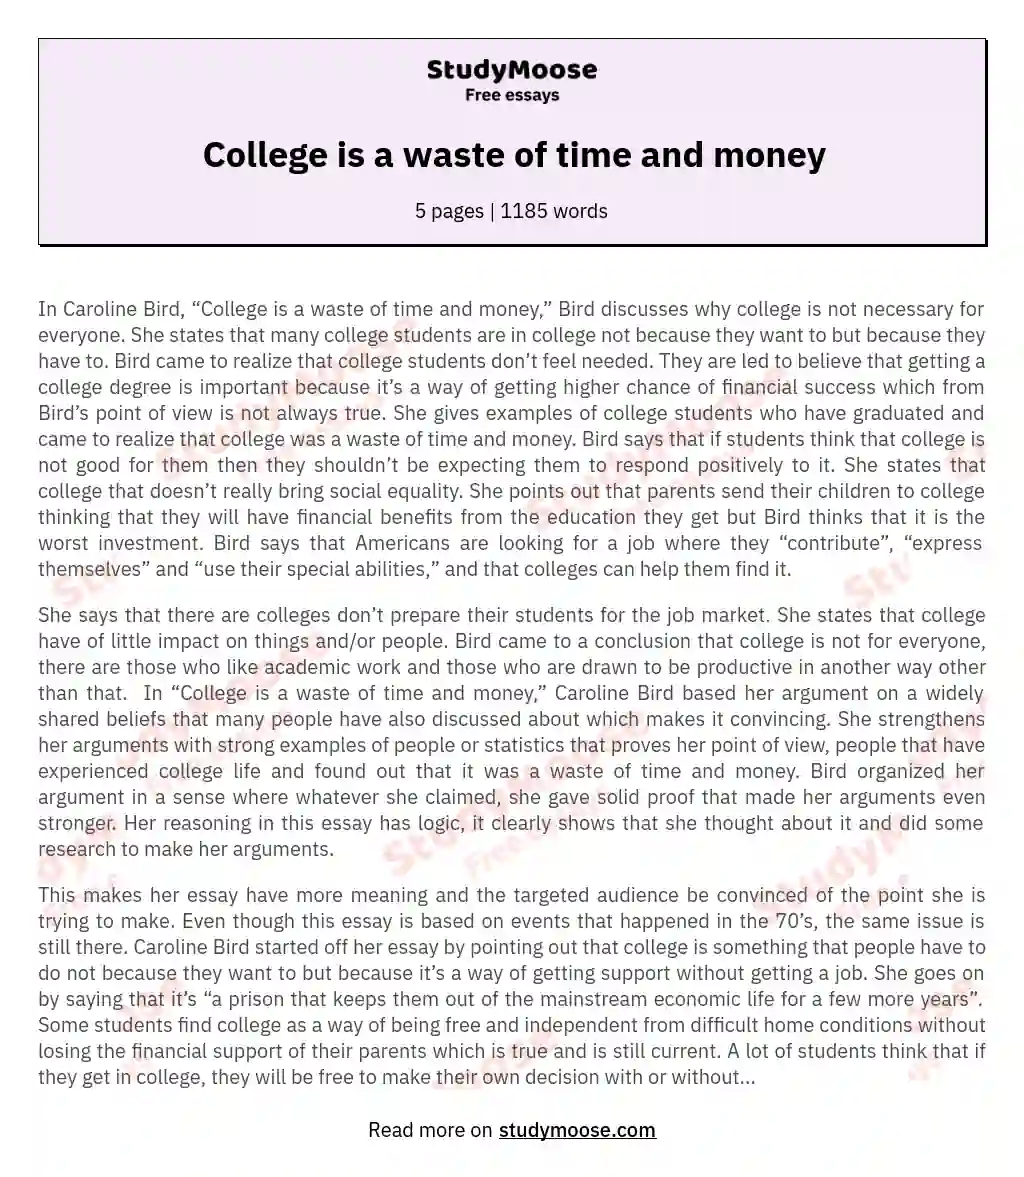 College is a waste of time and money essay